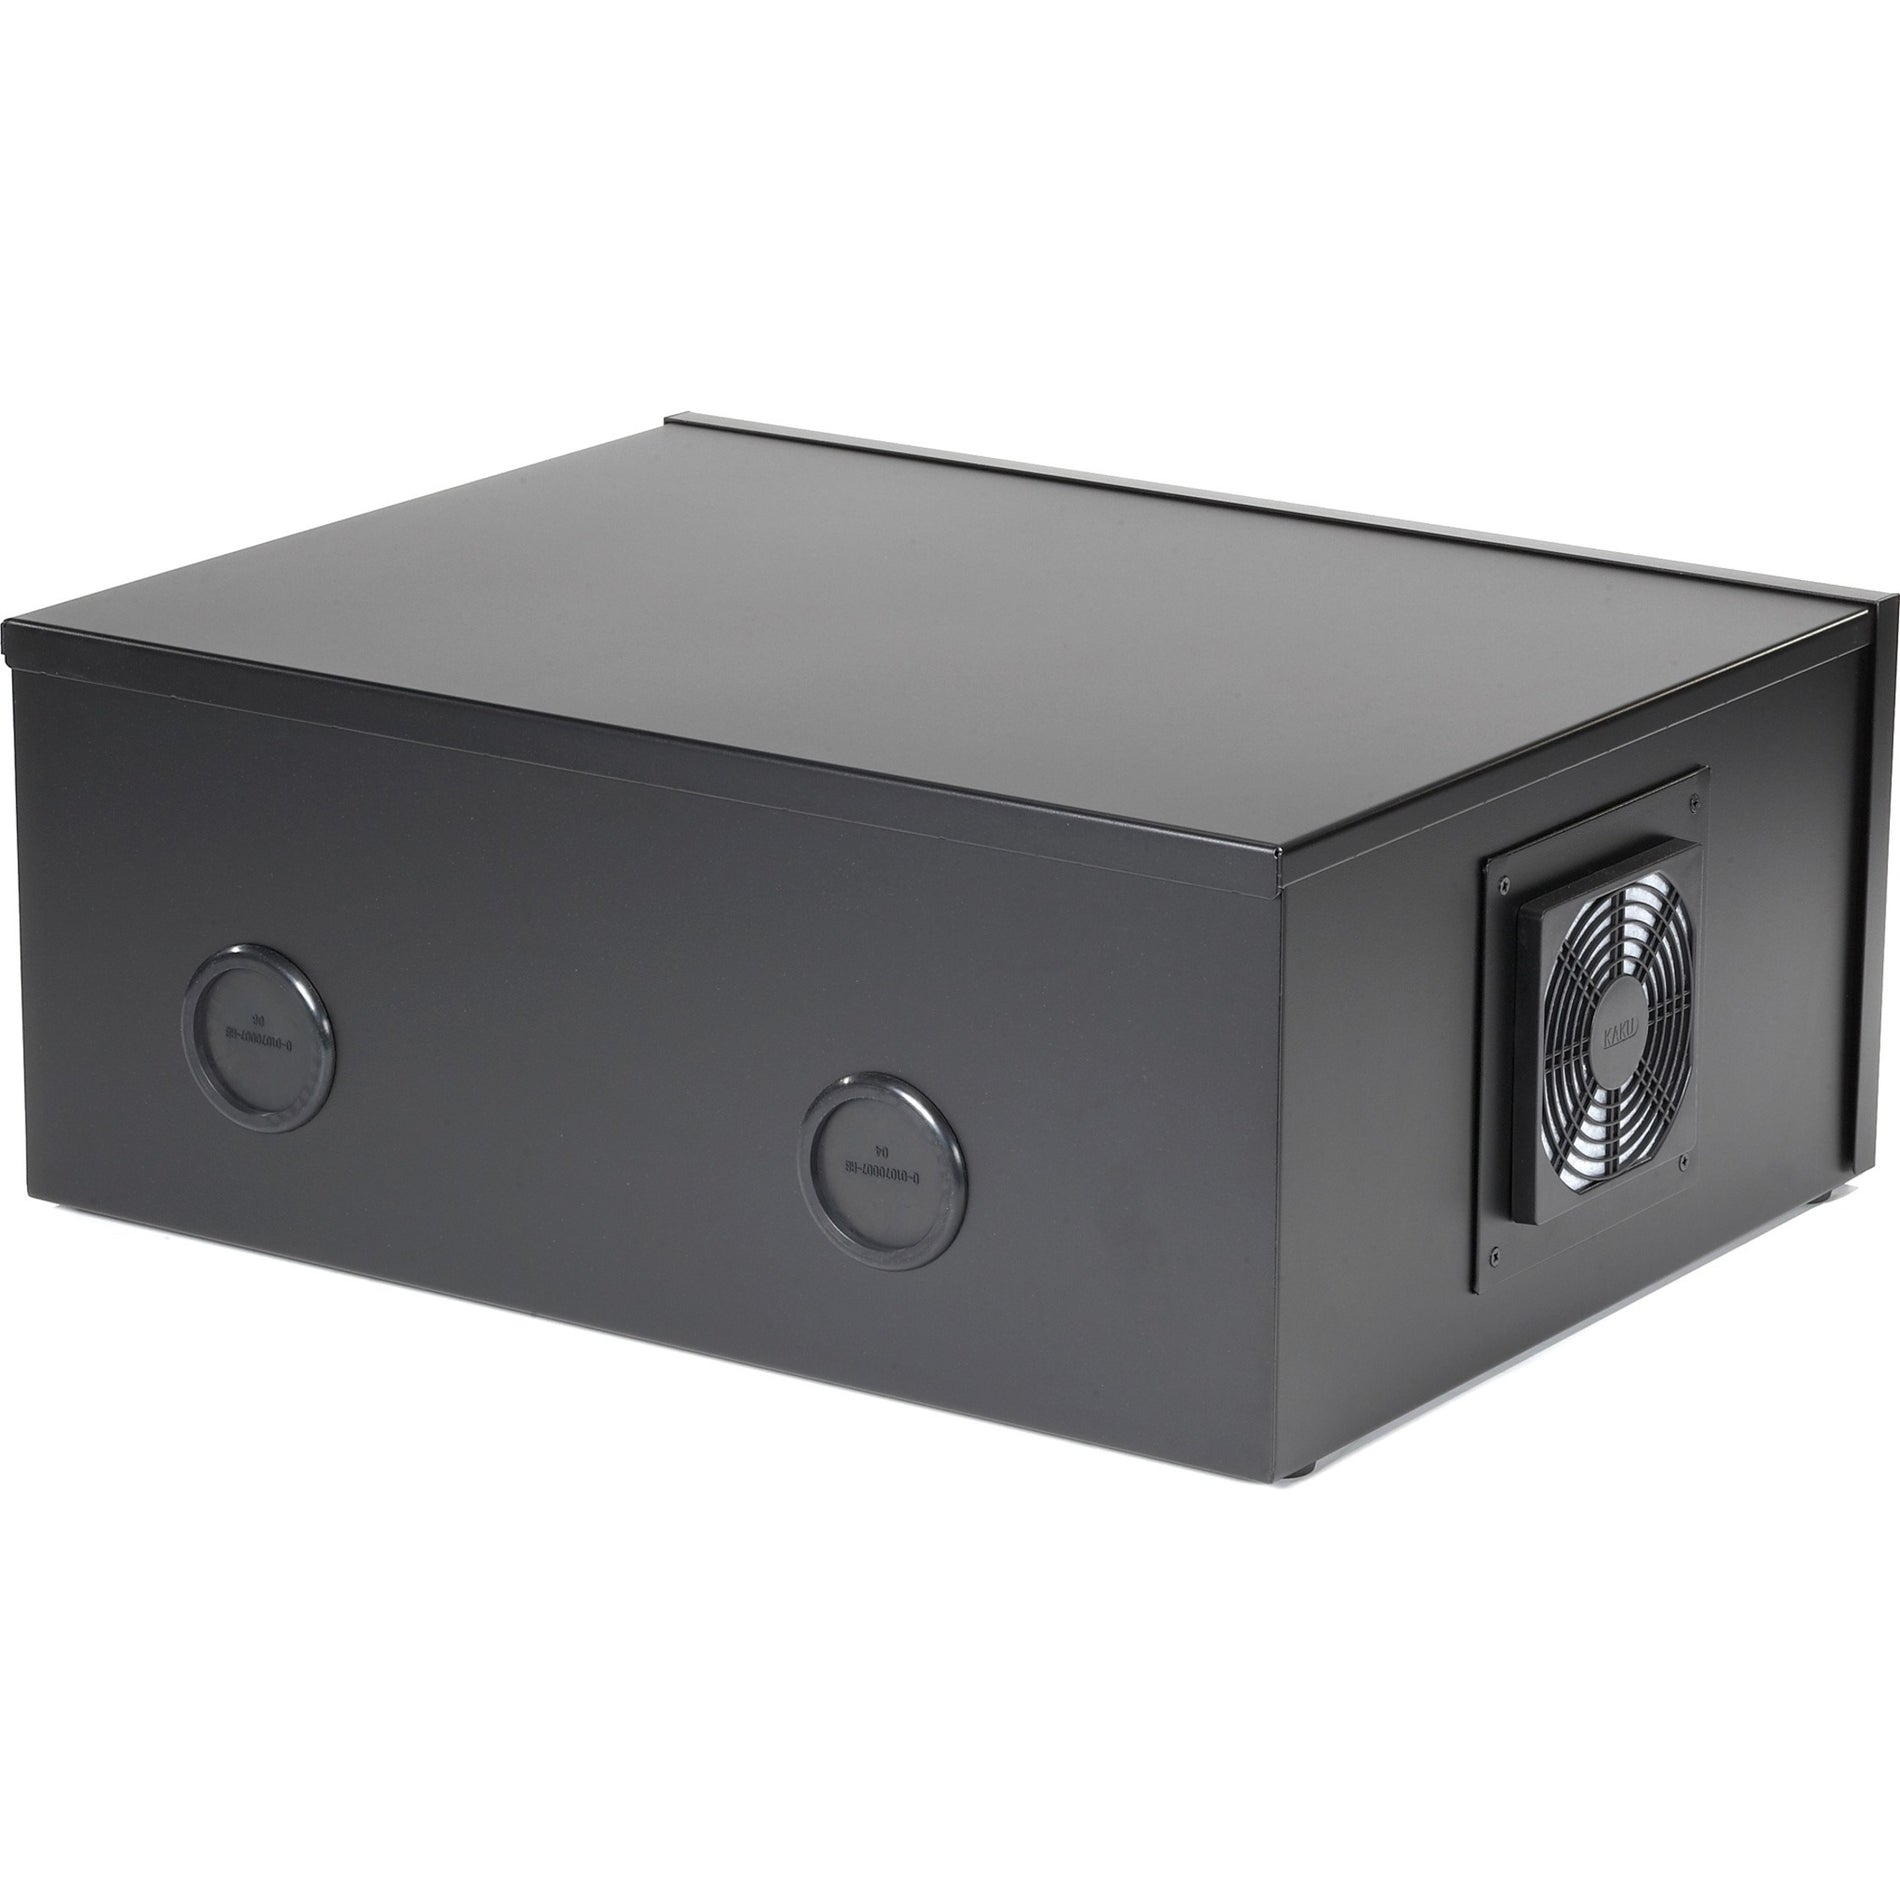 Black Box LCKBOX4U DVR Lock Box with Fan Unit, TAA Compliant - Secure Your DVR with Cable Management